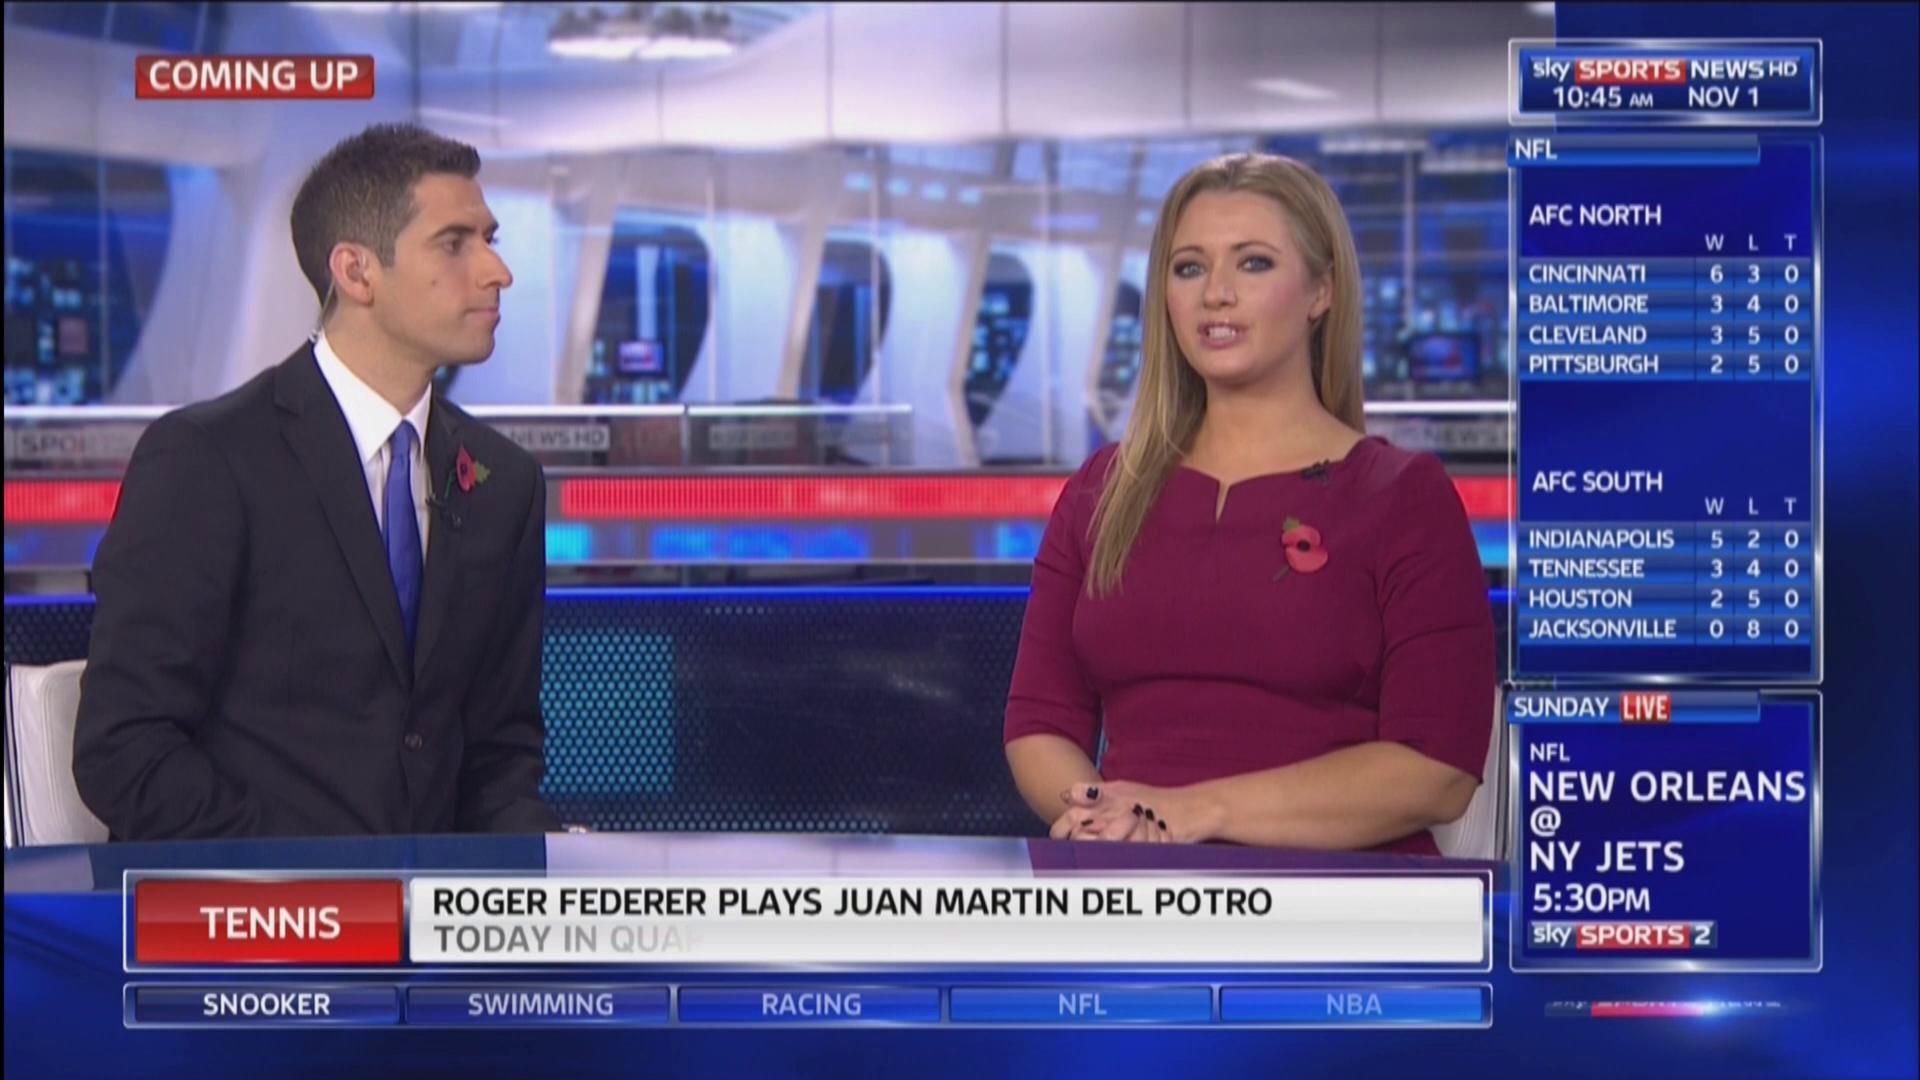 All posts from bolton in Hayley Mcqueen - Curvage